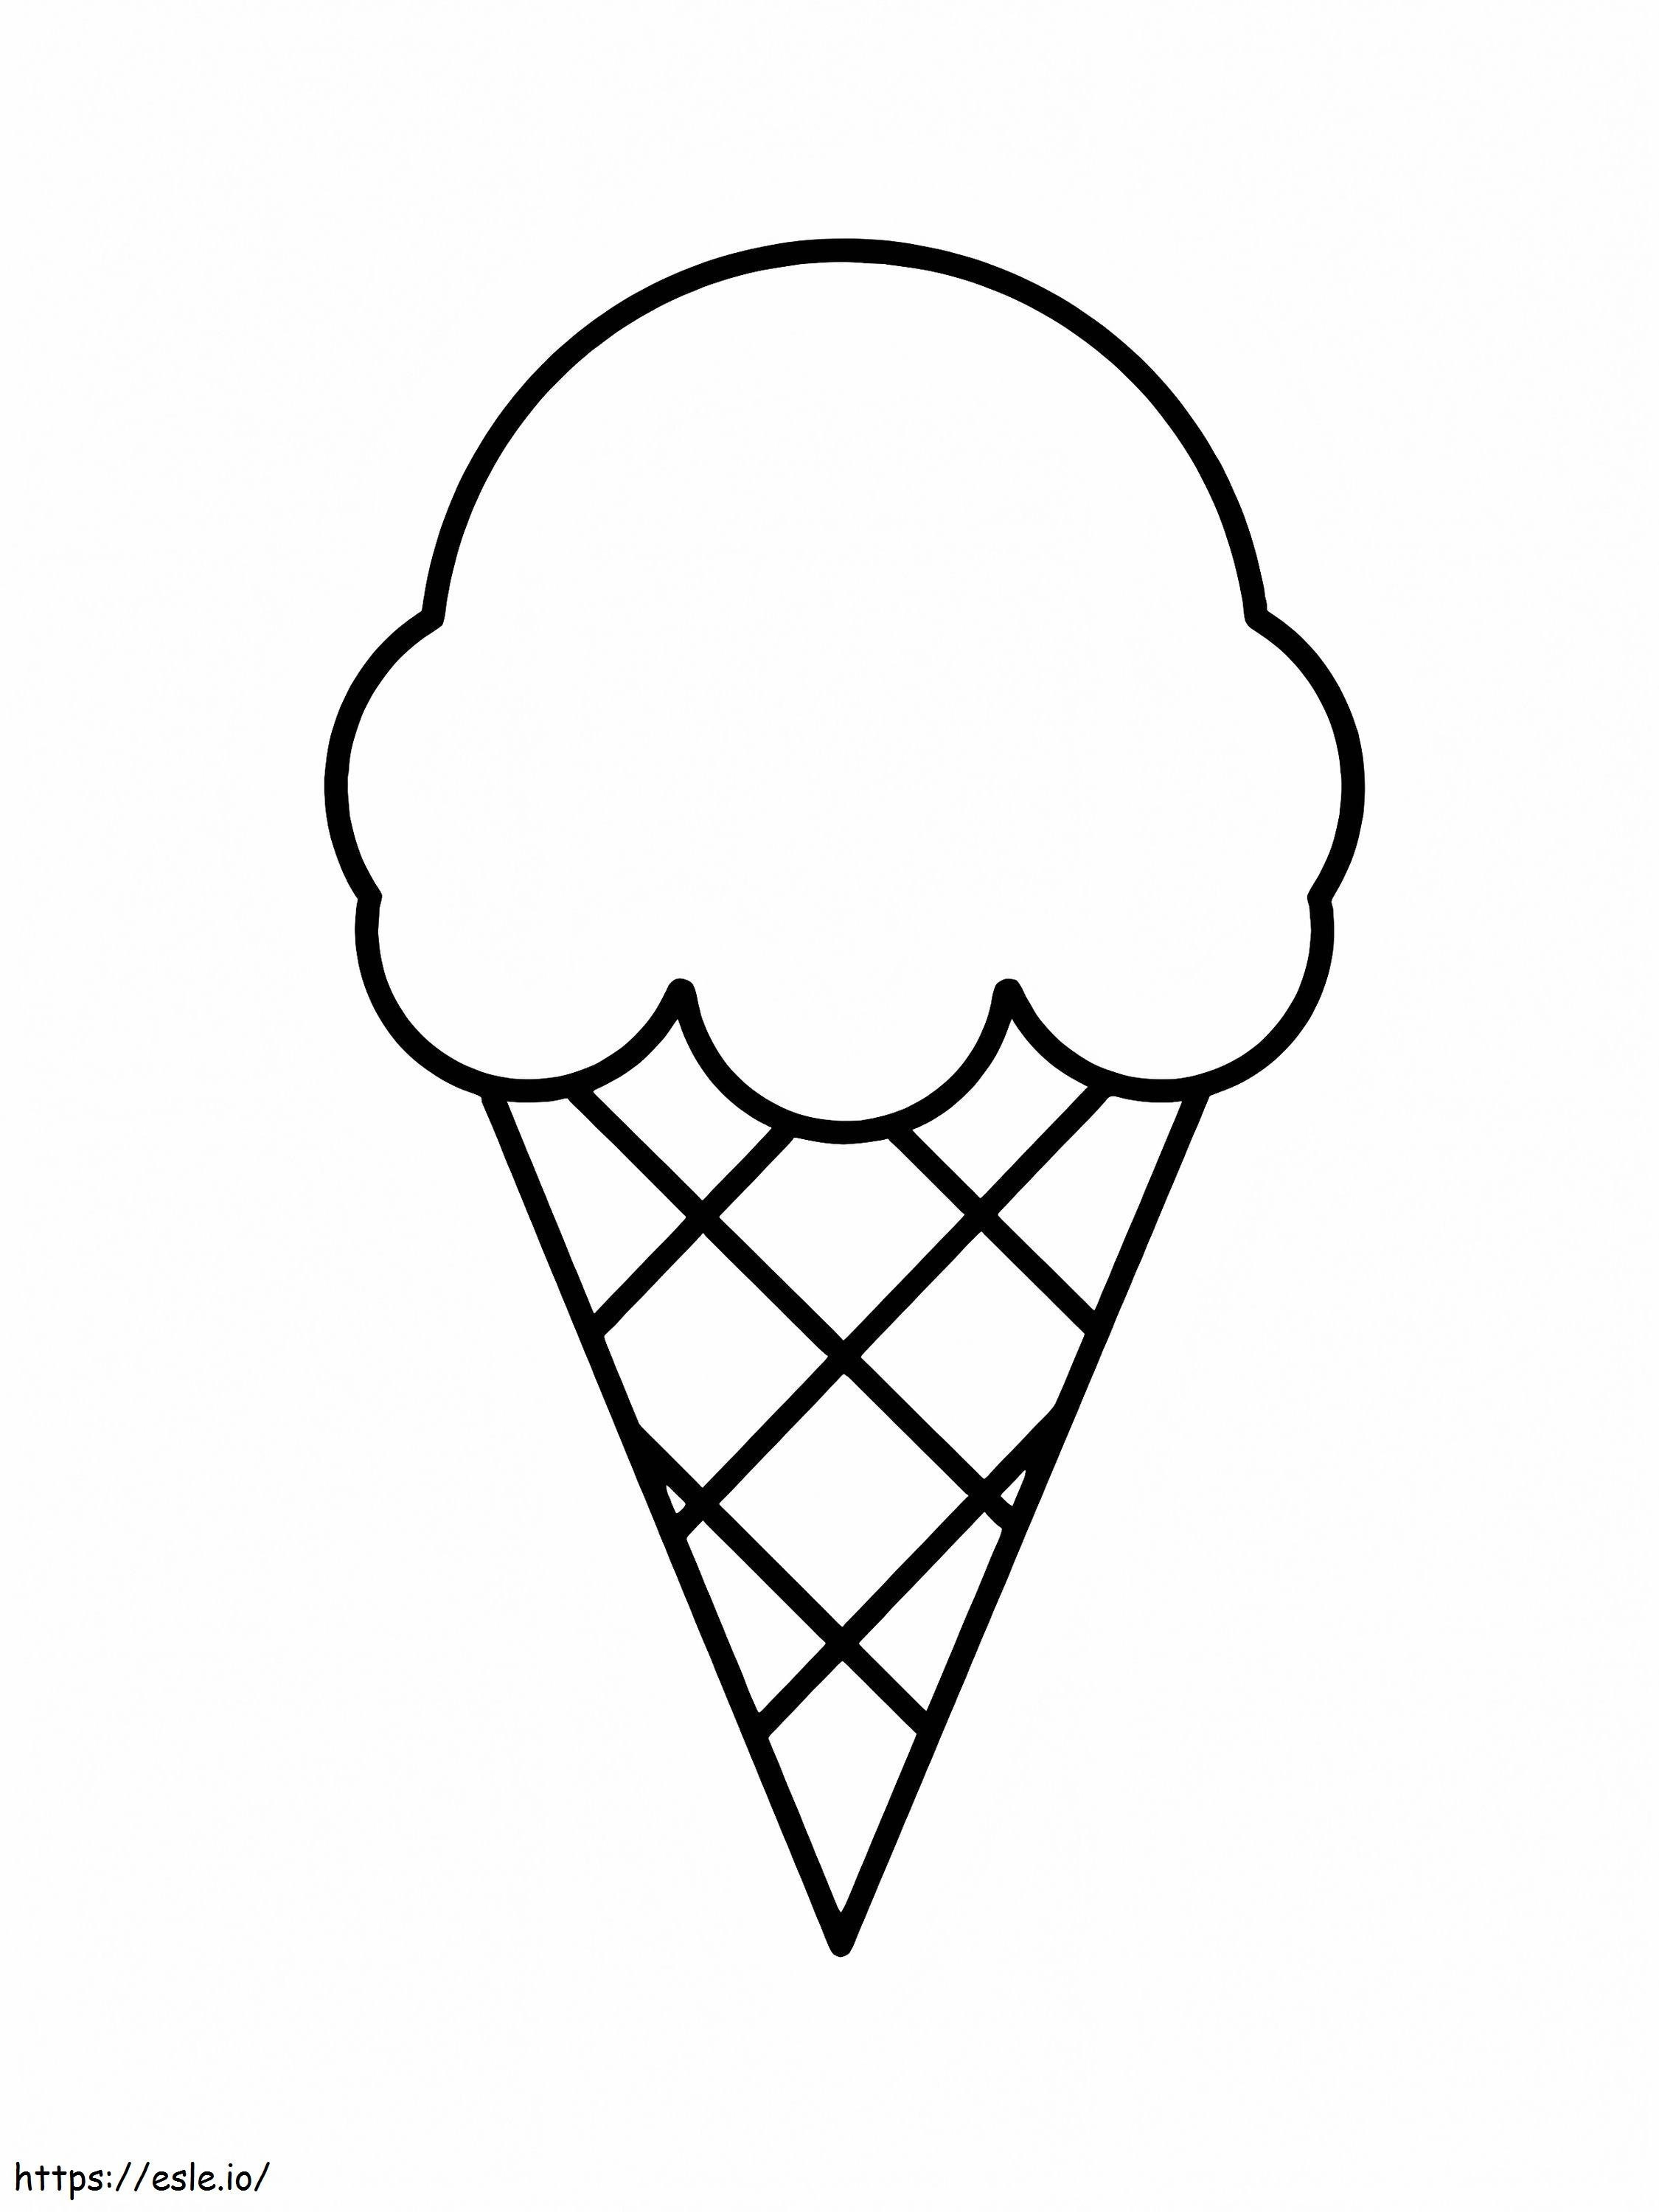 Basic Ice Cream coloring page